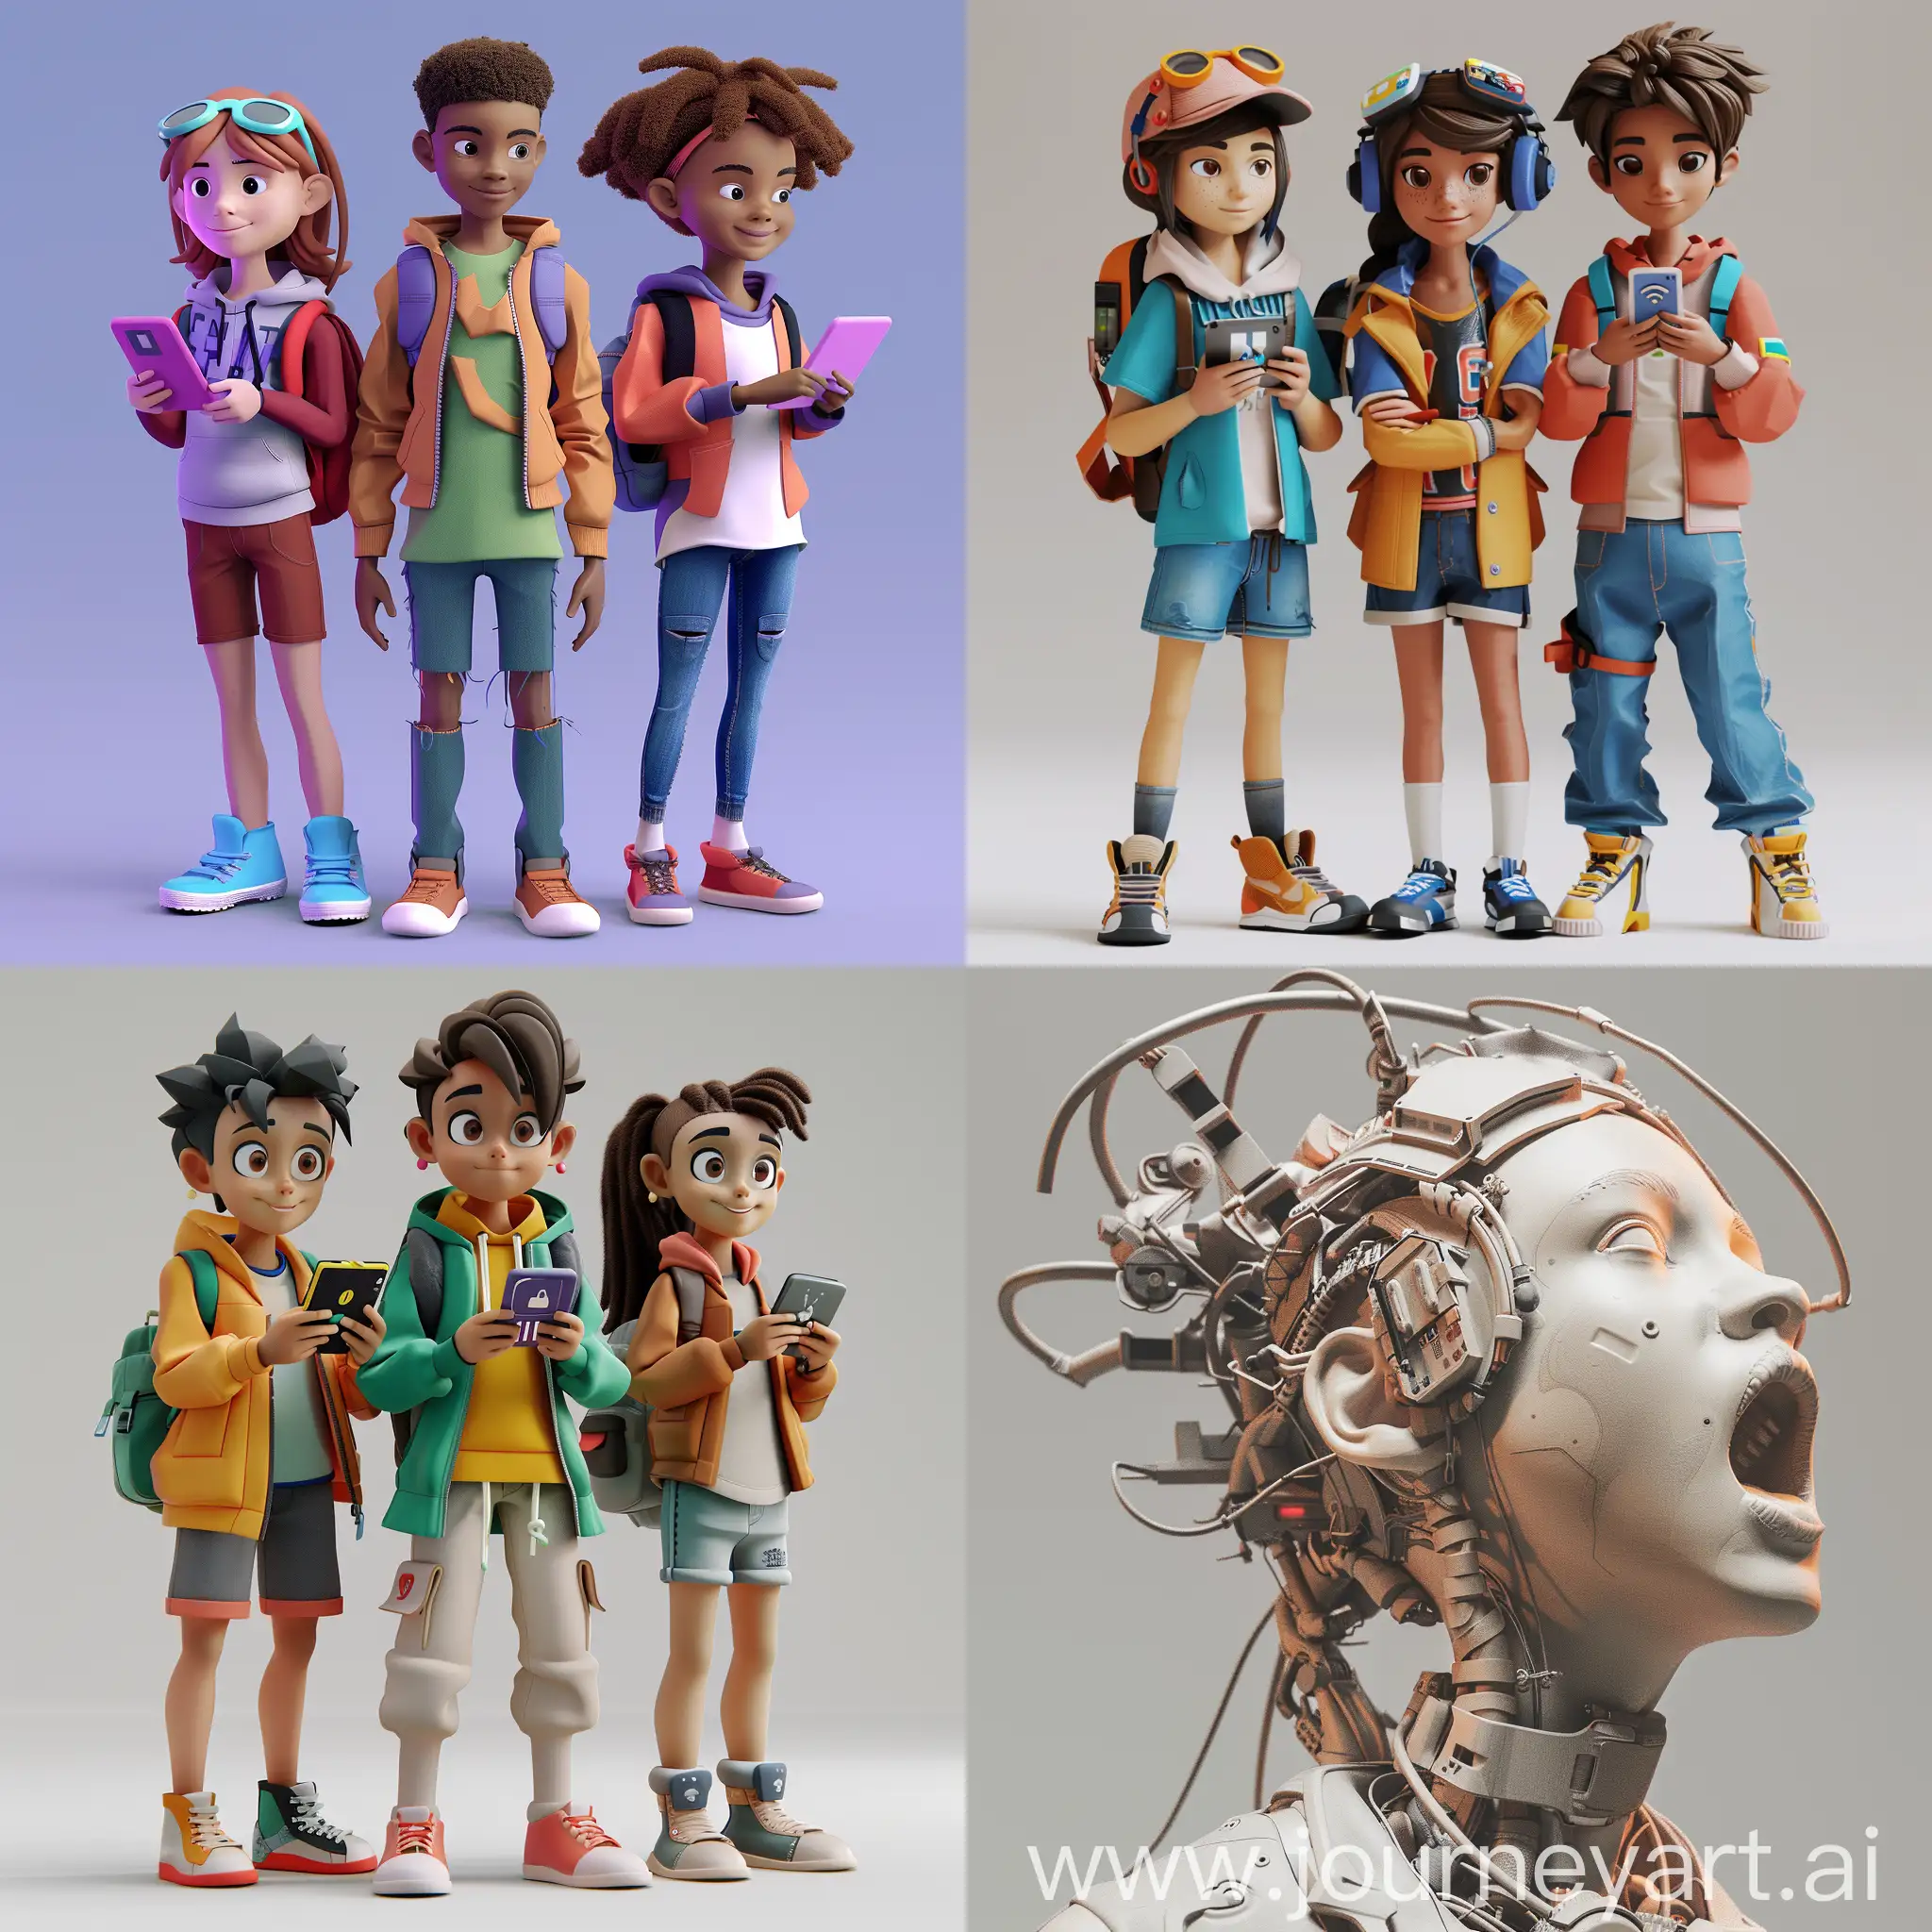 Show how the generation z youth are symbiotic with technology. It should be a clear compelling and beautiful 3d image 